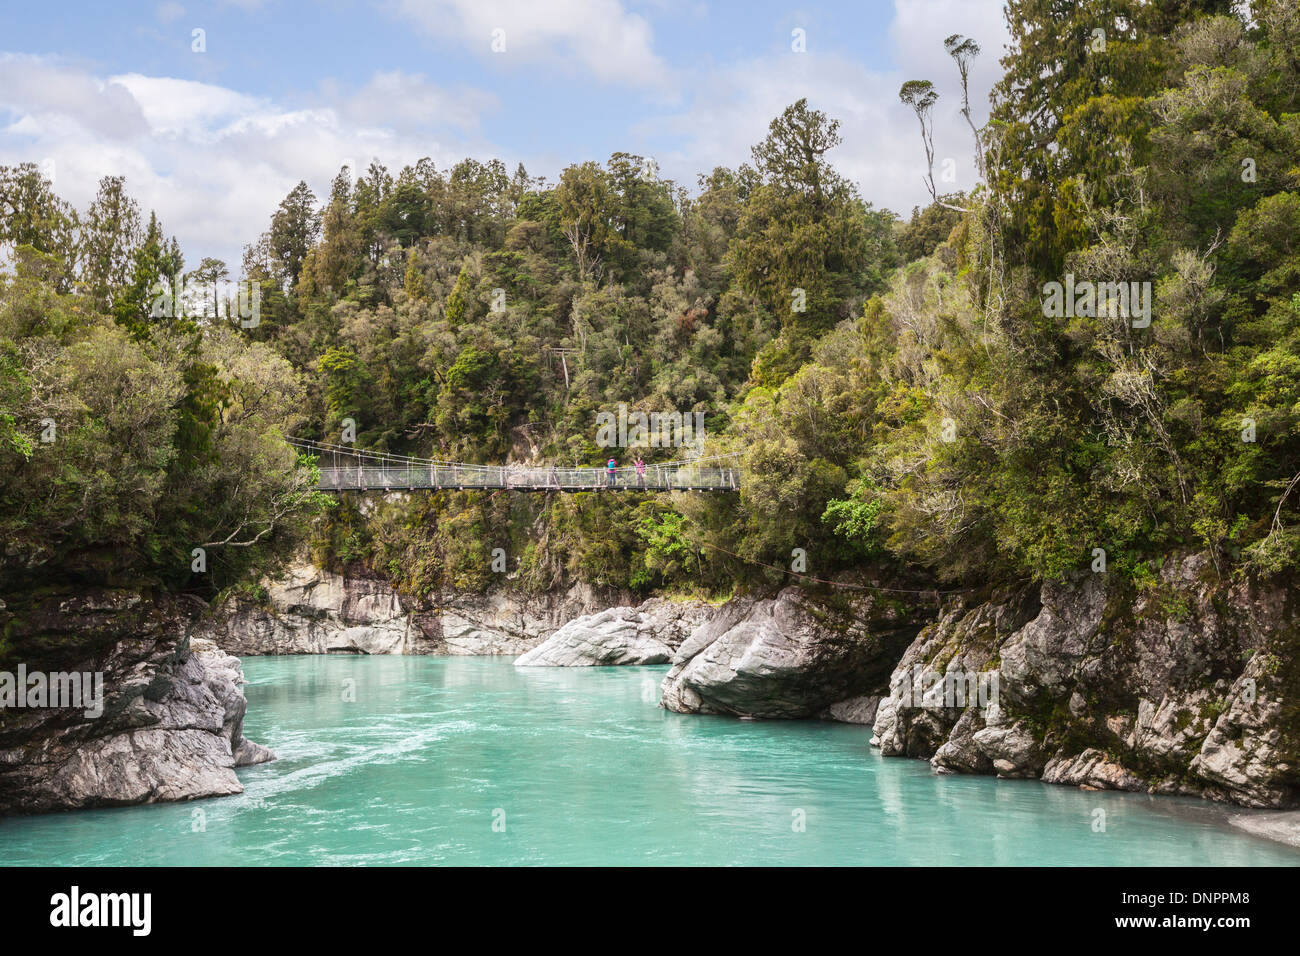 The gorge of the Hokitika River, West Coast, in the South Island of New Zealand. The colour of the water is... Stock Photo